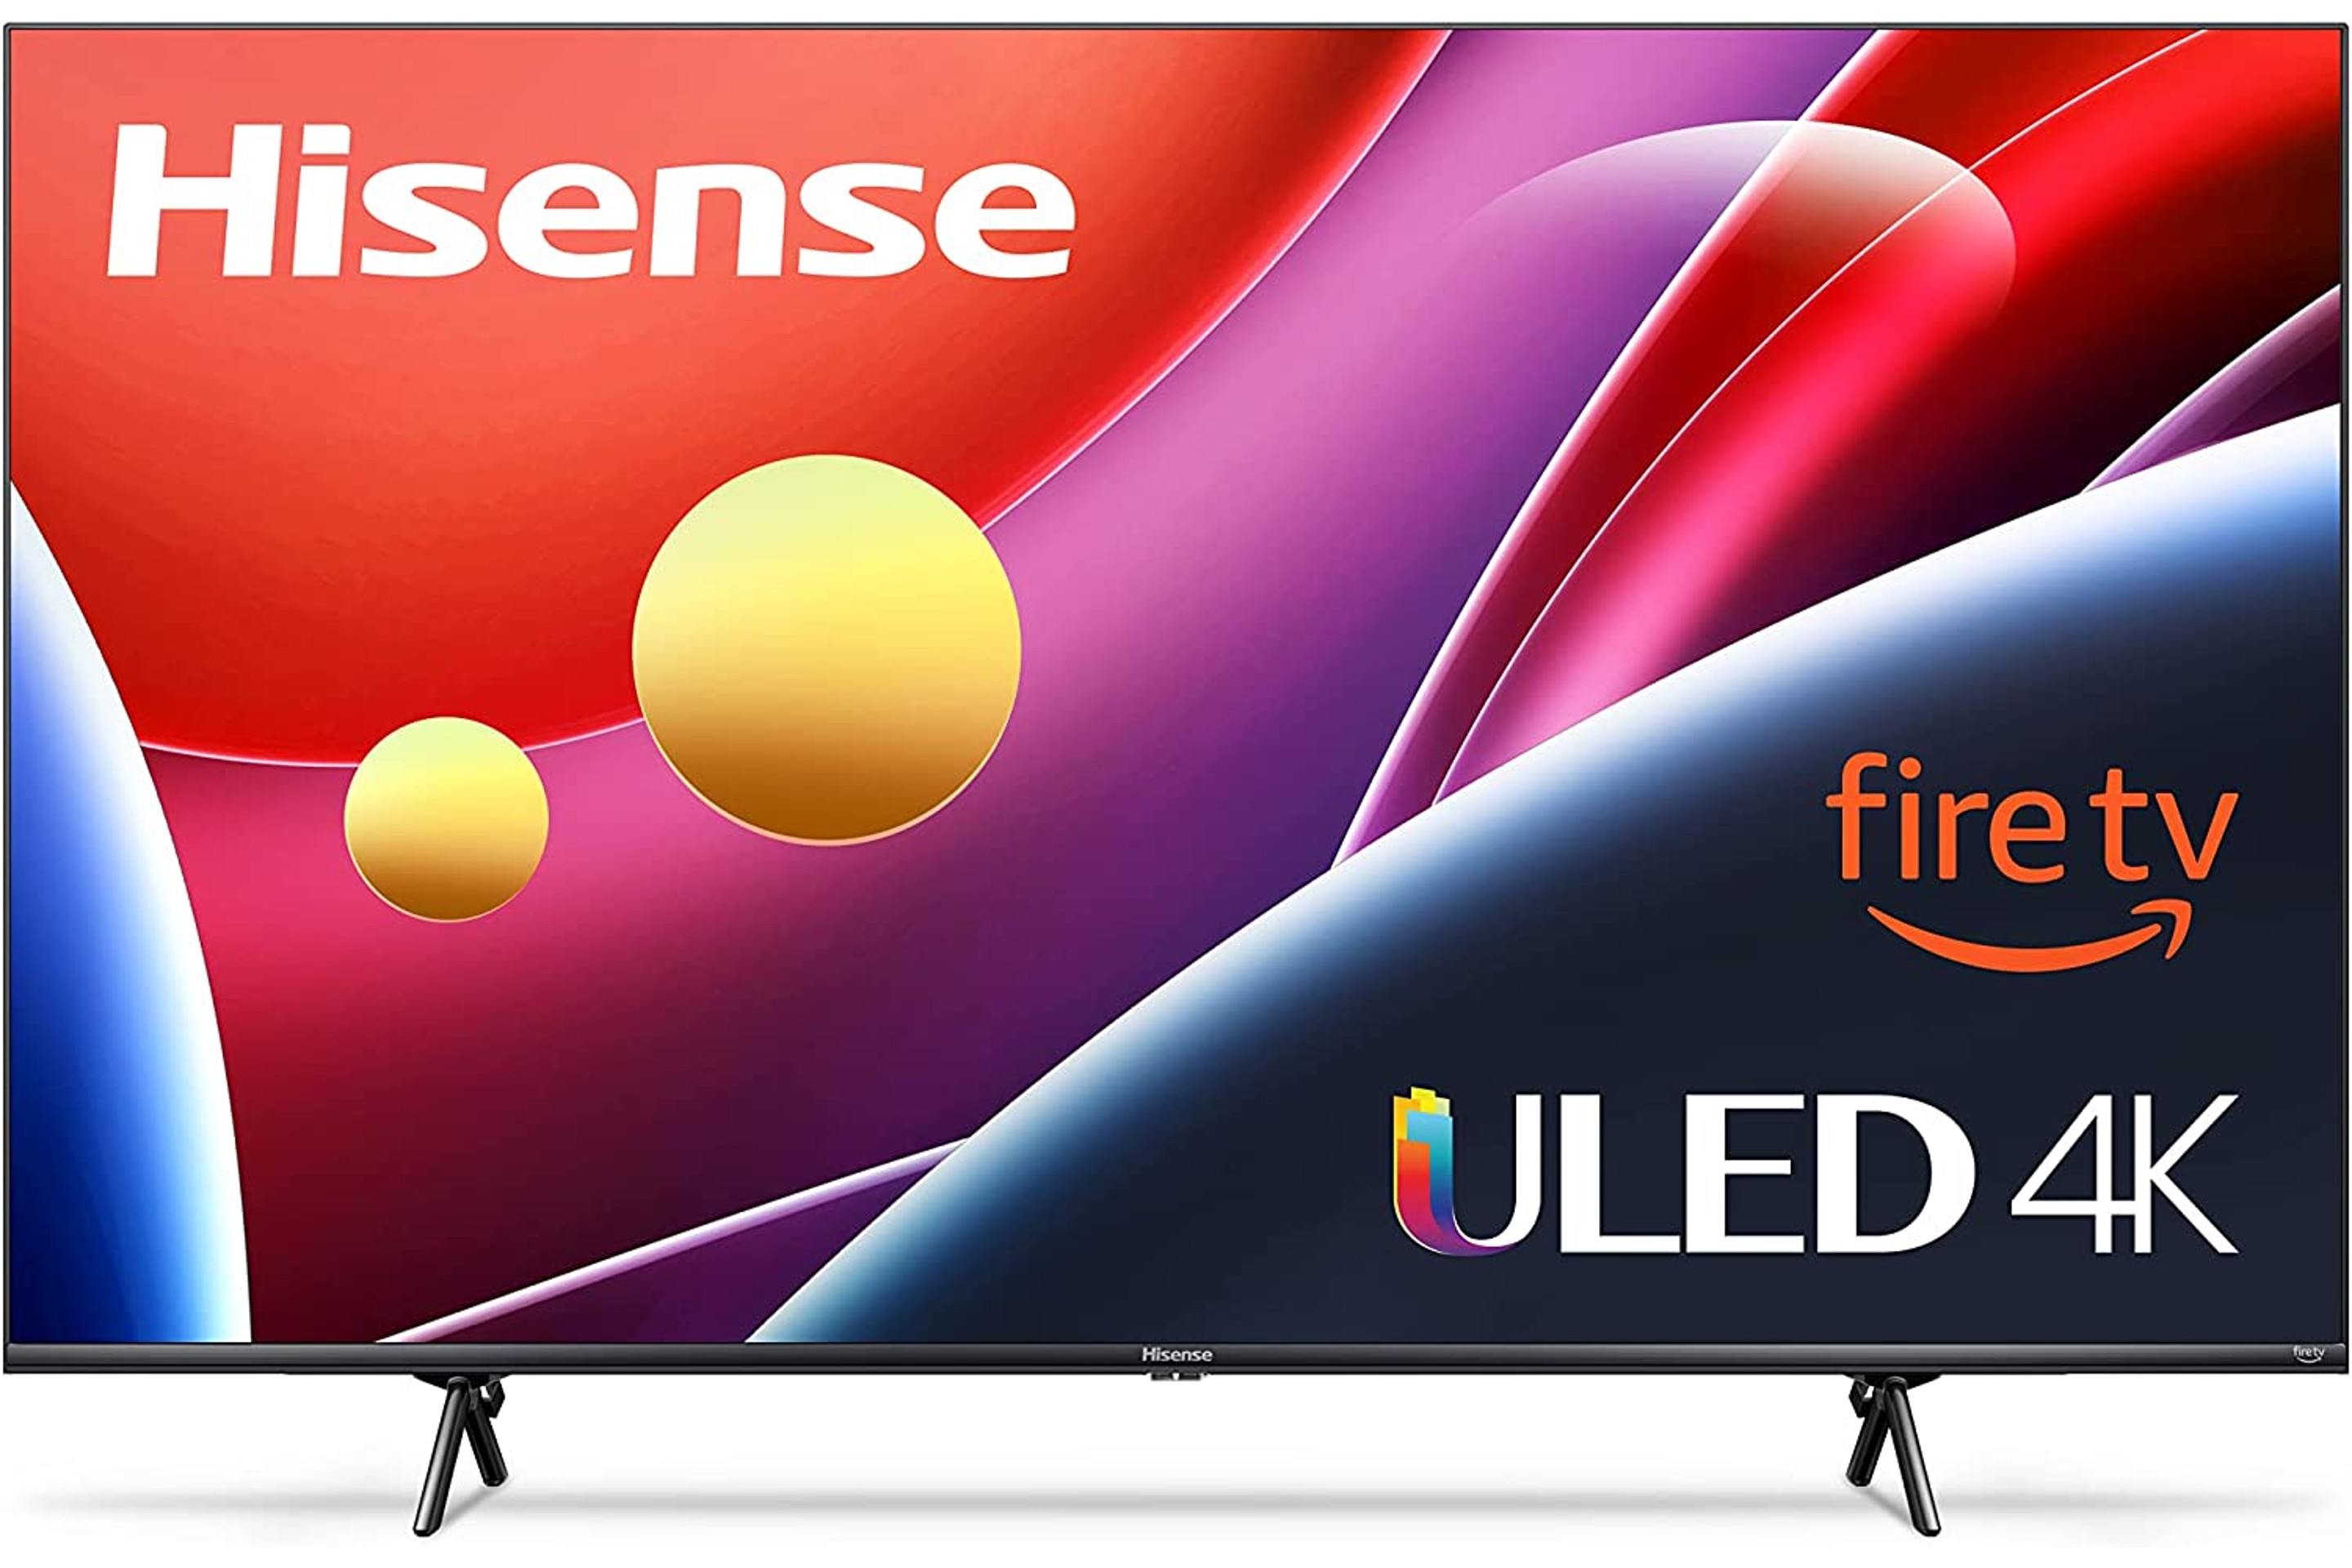 Enhance Your Entertainment With These Smart TV Deals